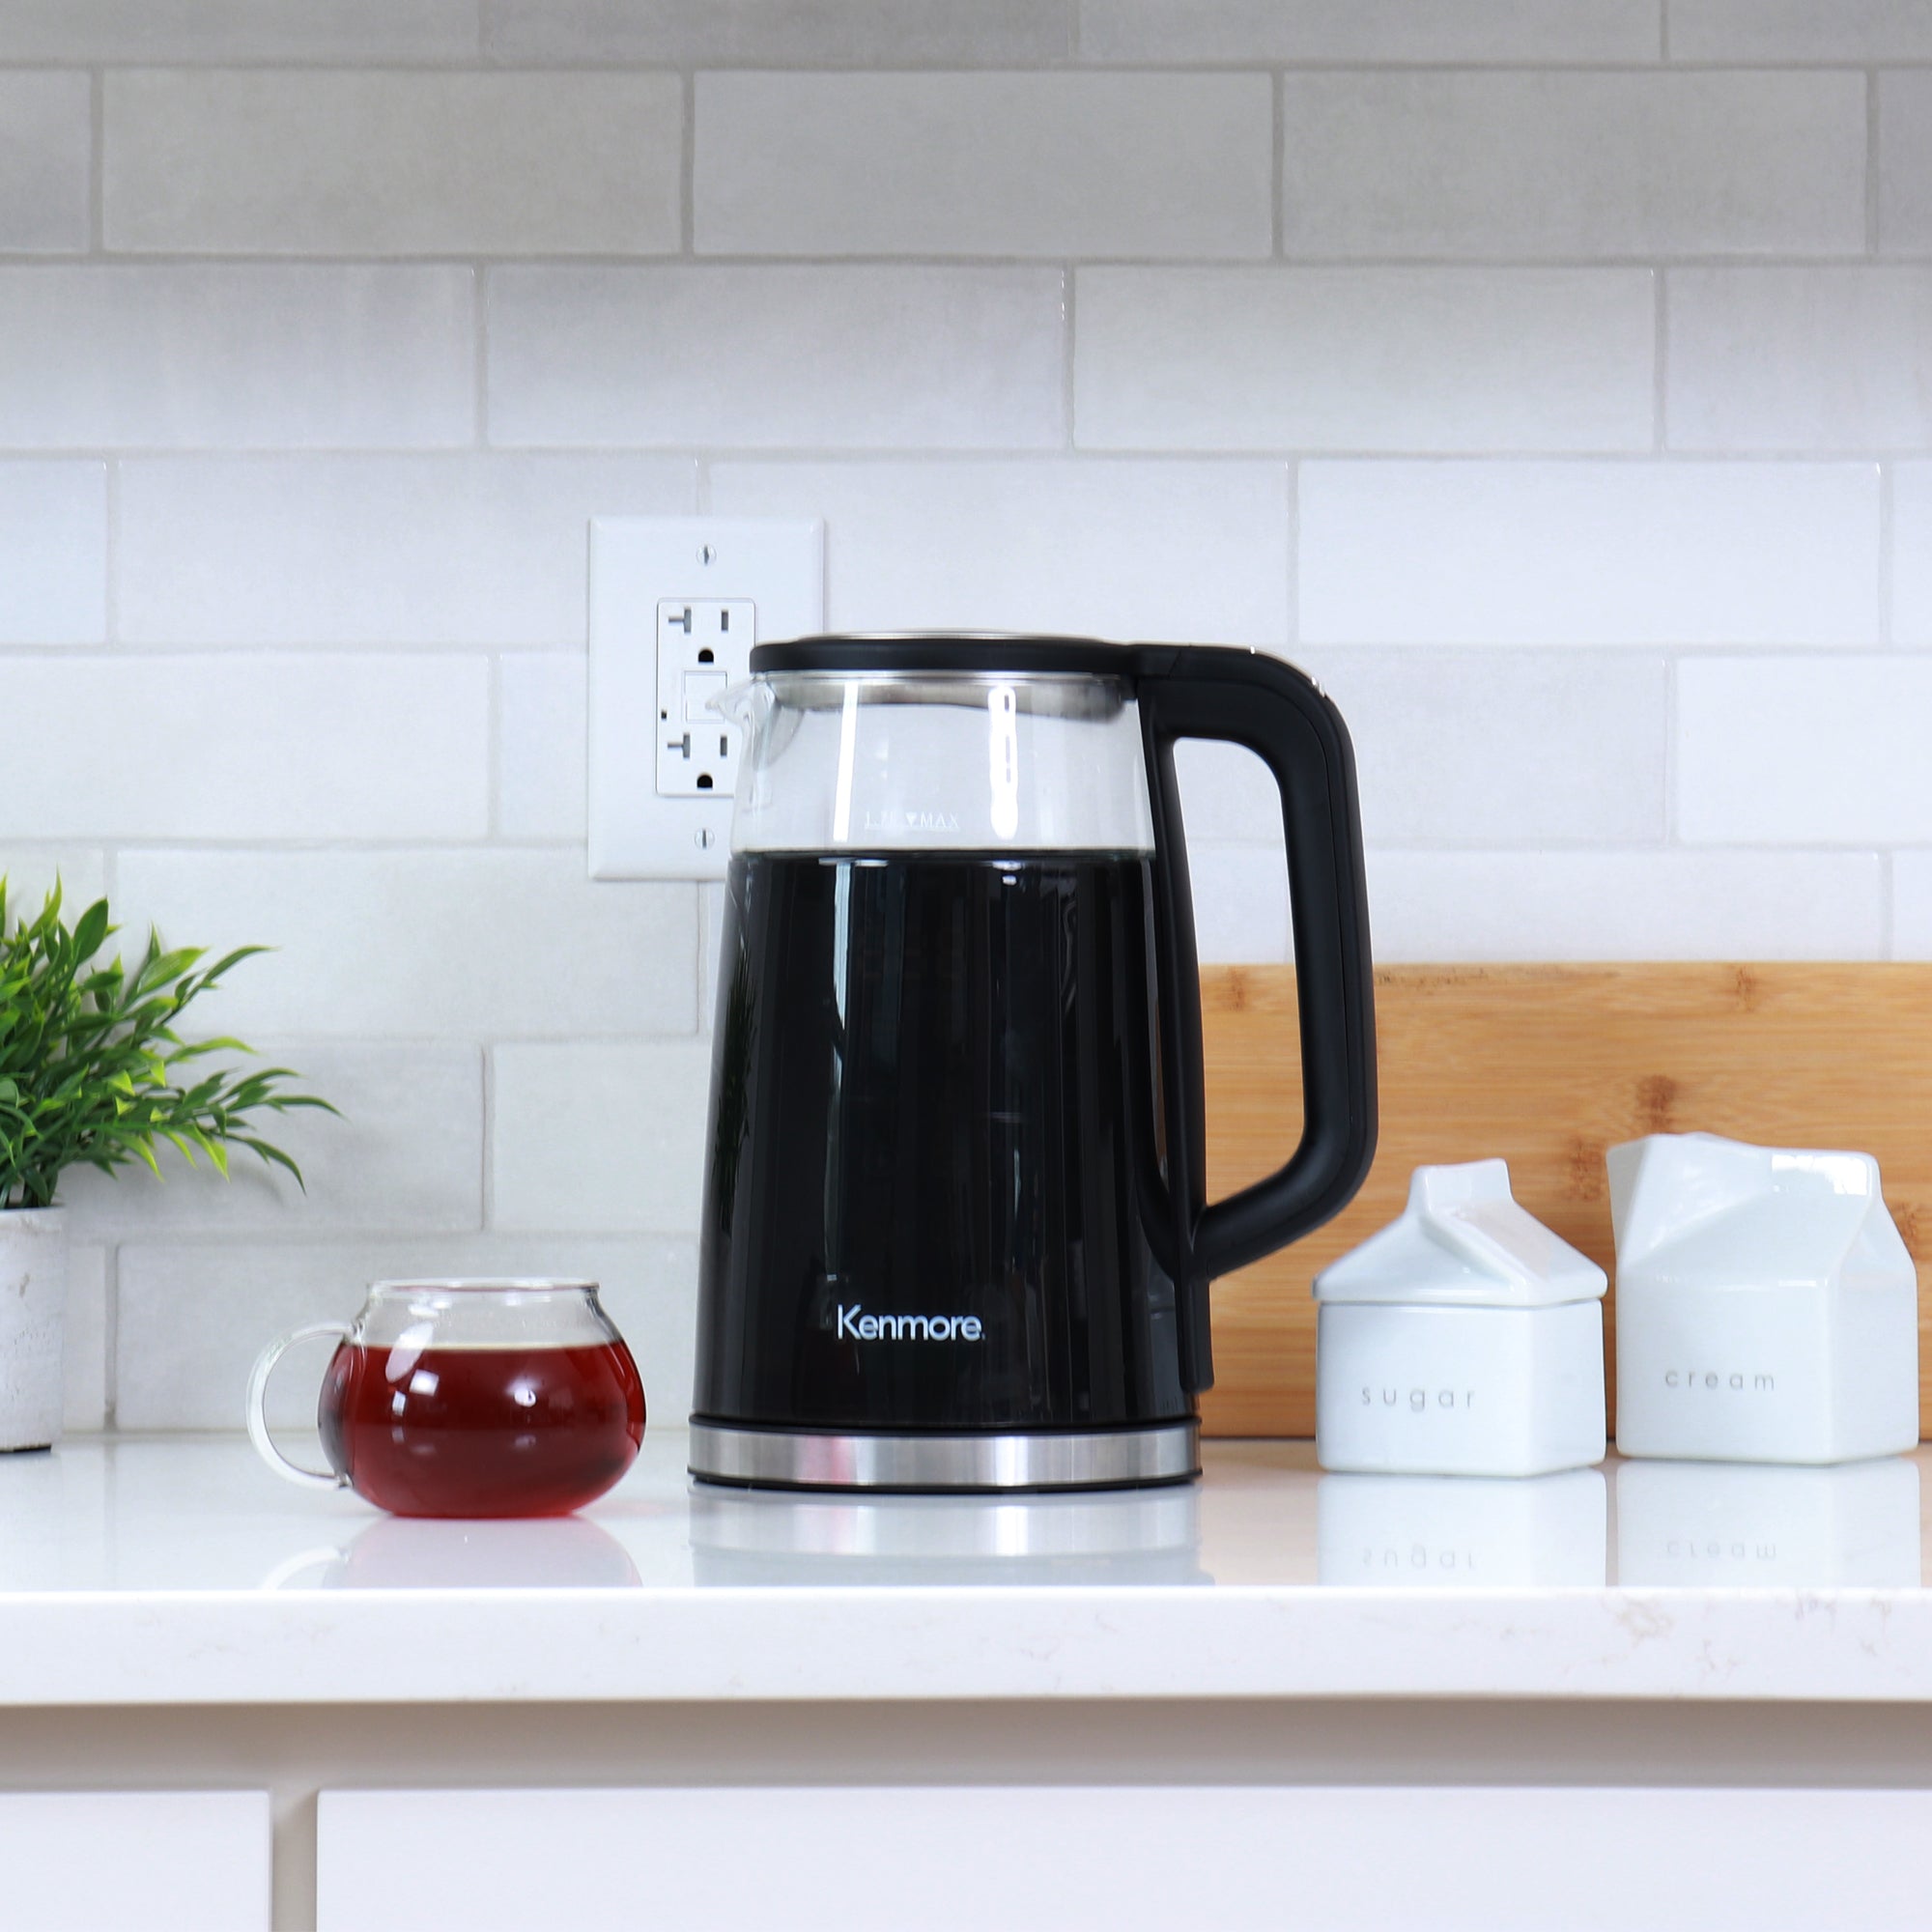 Kenmore Double-Walled Glass Electric Kettle 1.7L, Digital Programmable Tea-Kettle, 4 Temperature Pre-Sets, Touch-Activated Controls, Cordless Pouring, Cool-Touch Hot Water Boiler, Keep Warm, Black